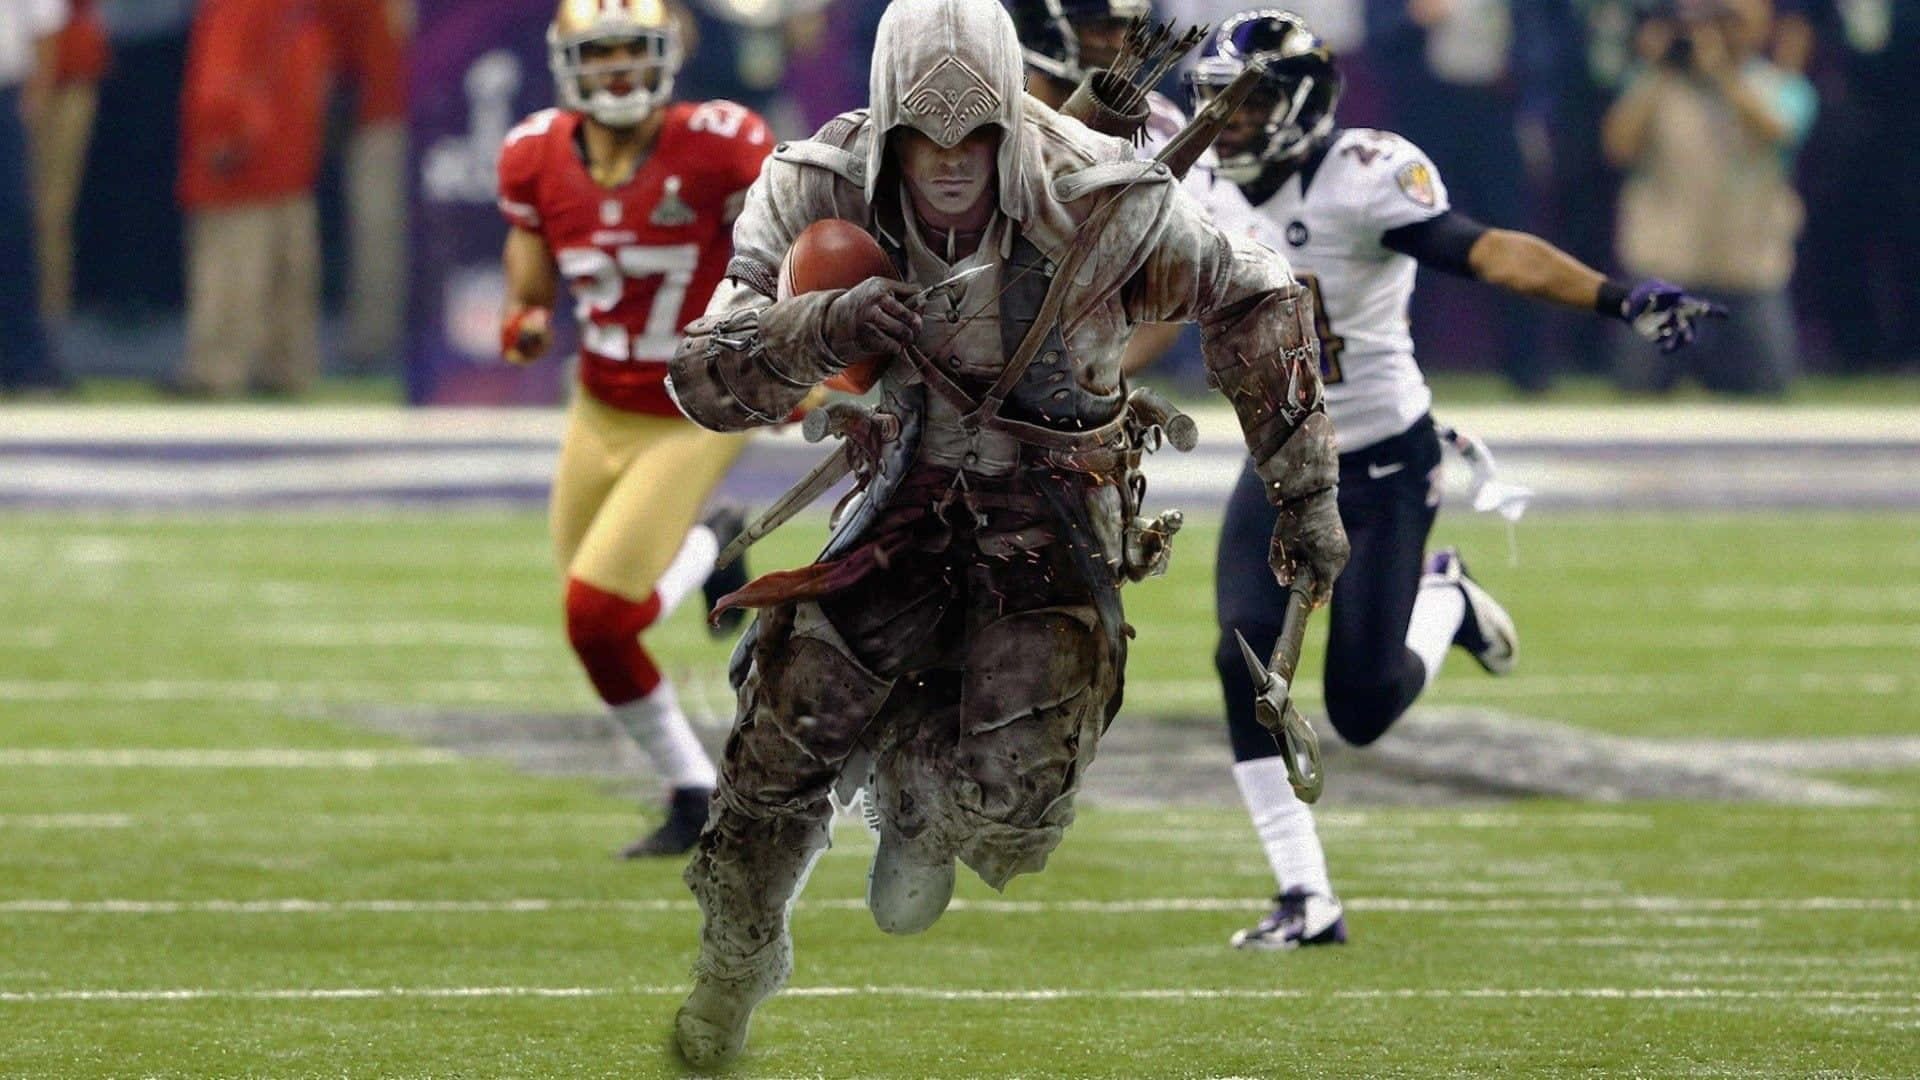 A Football Player Running With A Sword